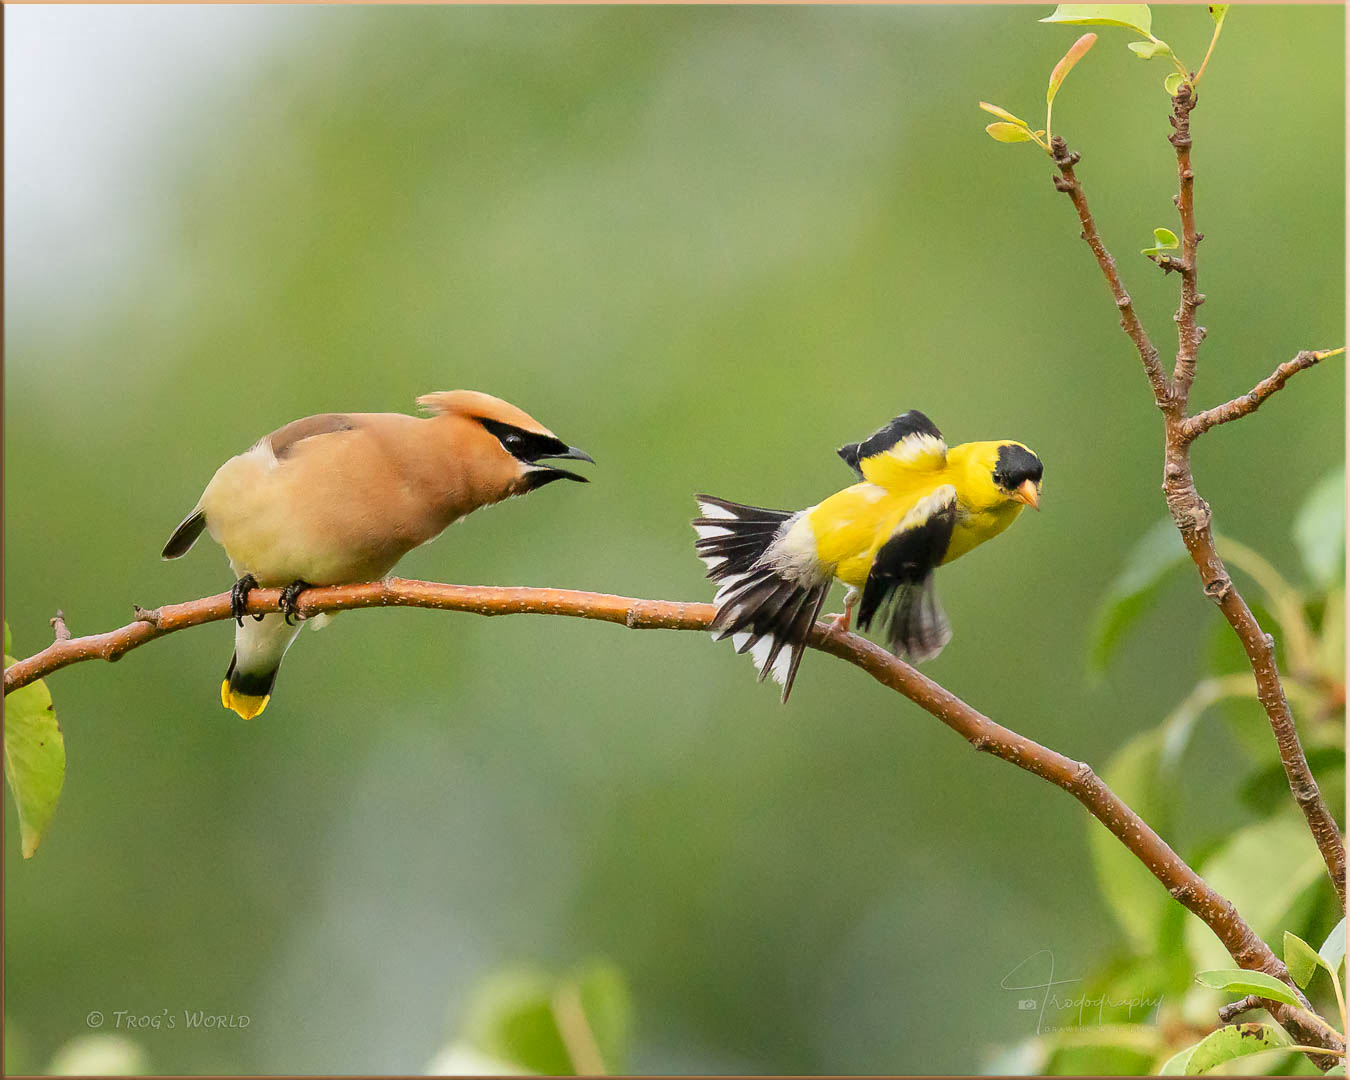 Cedar Waxwing and American Goldfinch in a tussle